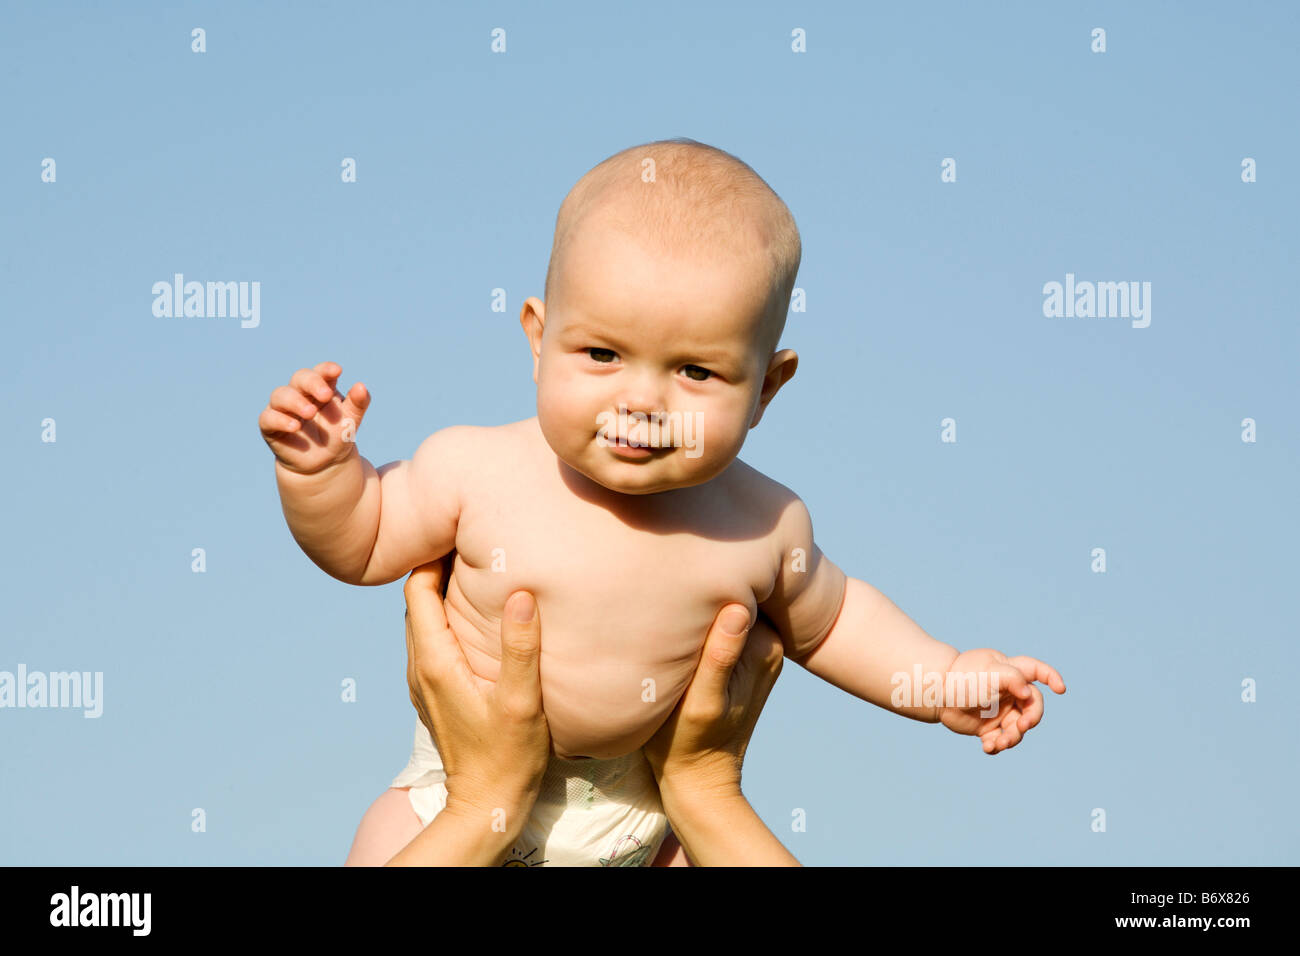 a nacked baby in front of the blue sky Stock Photo